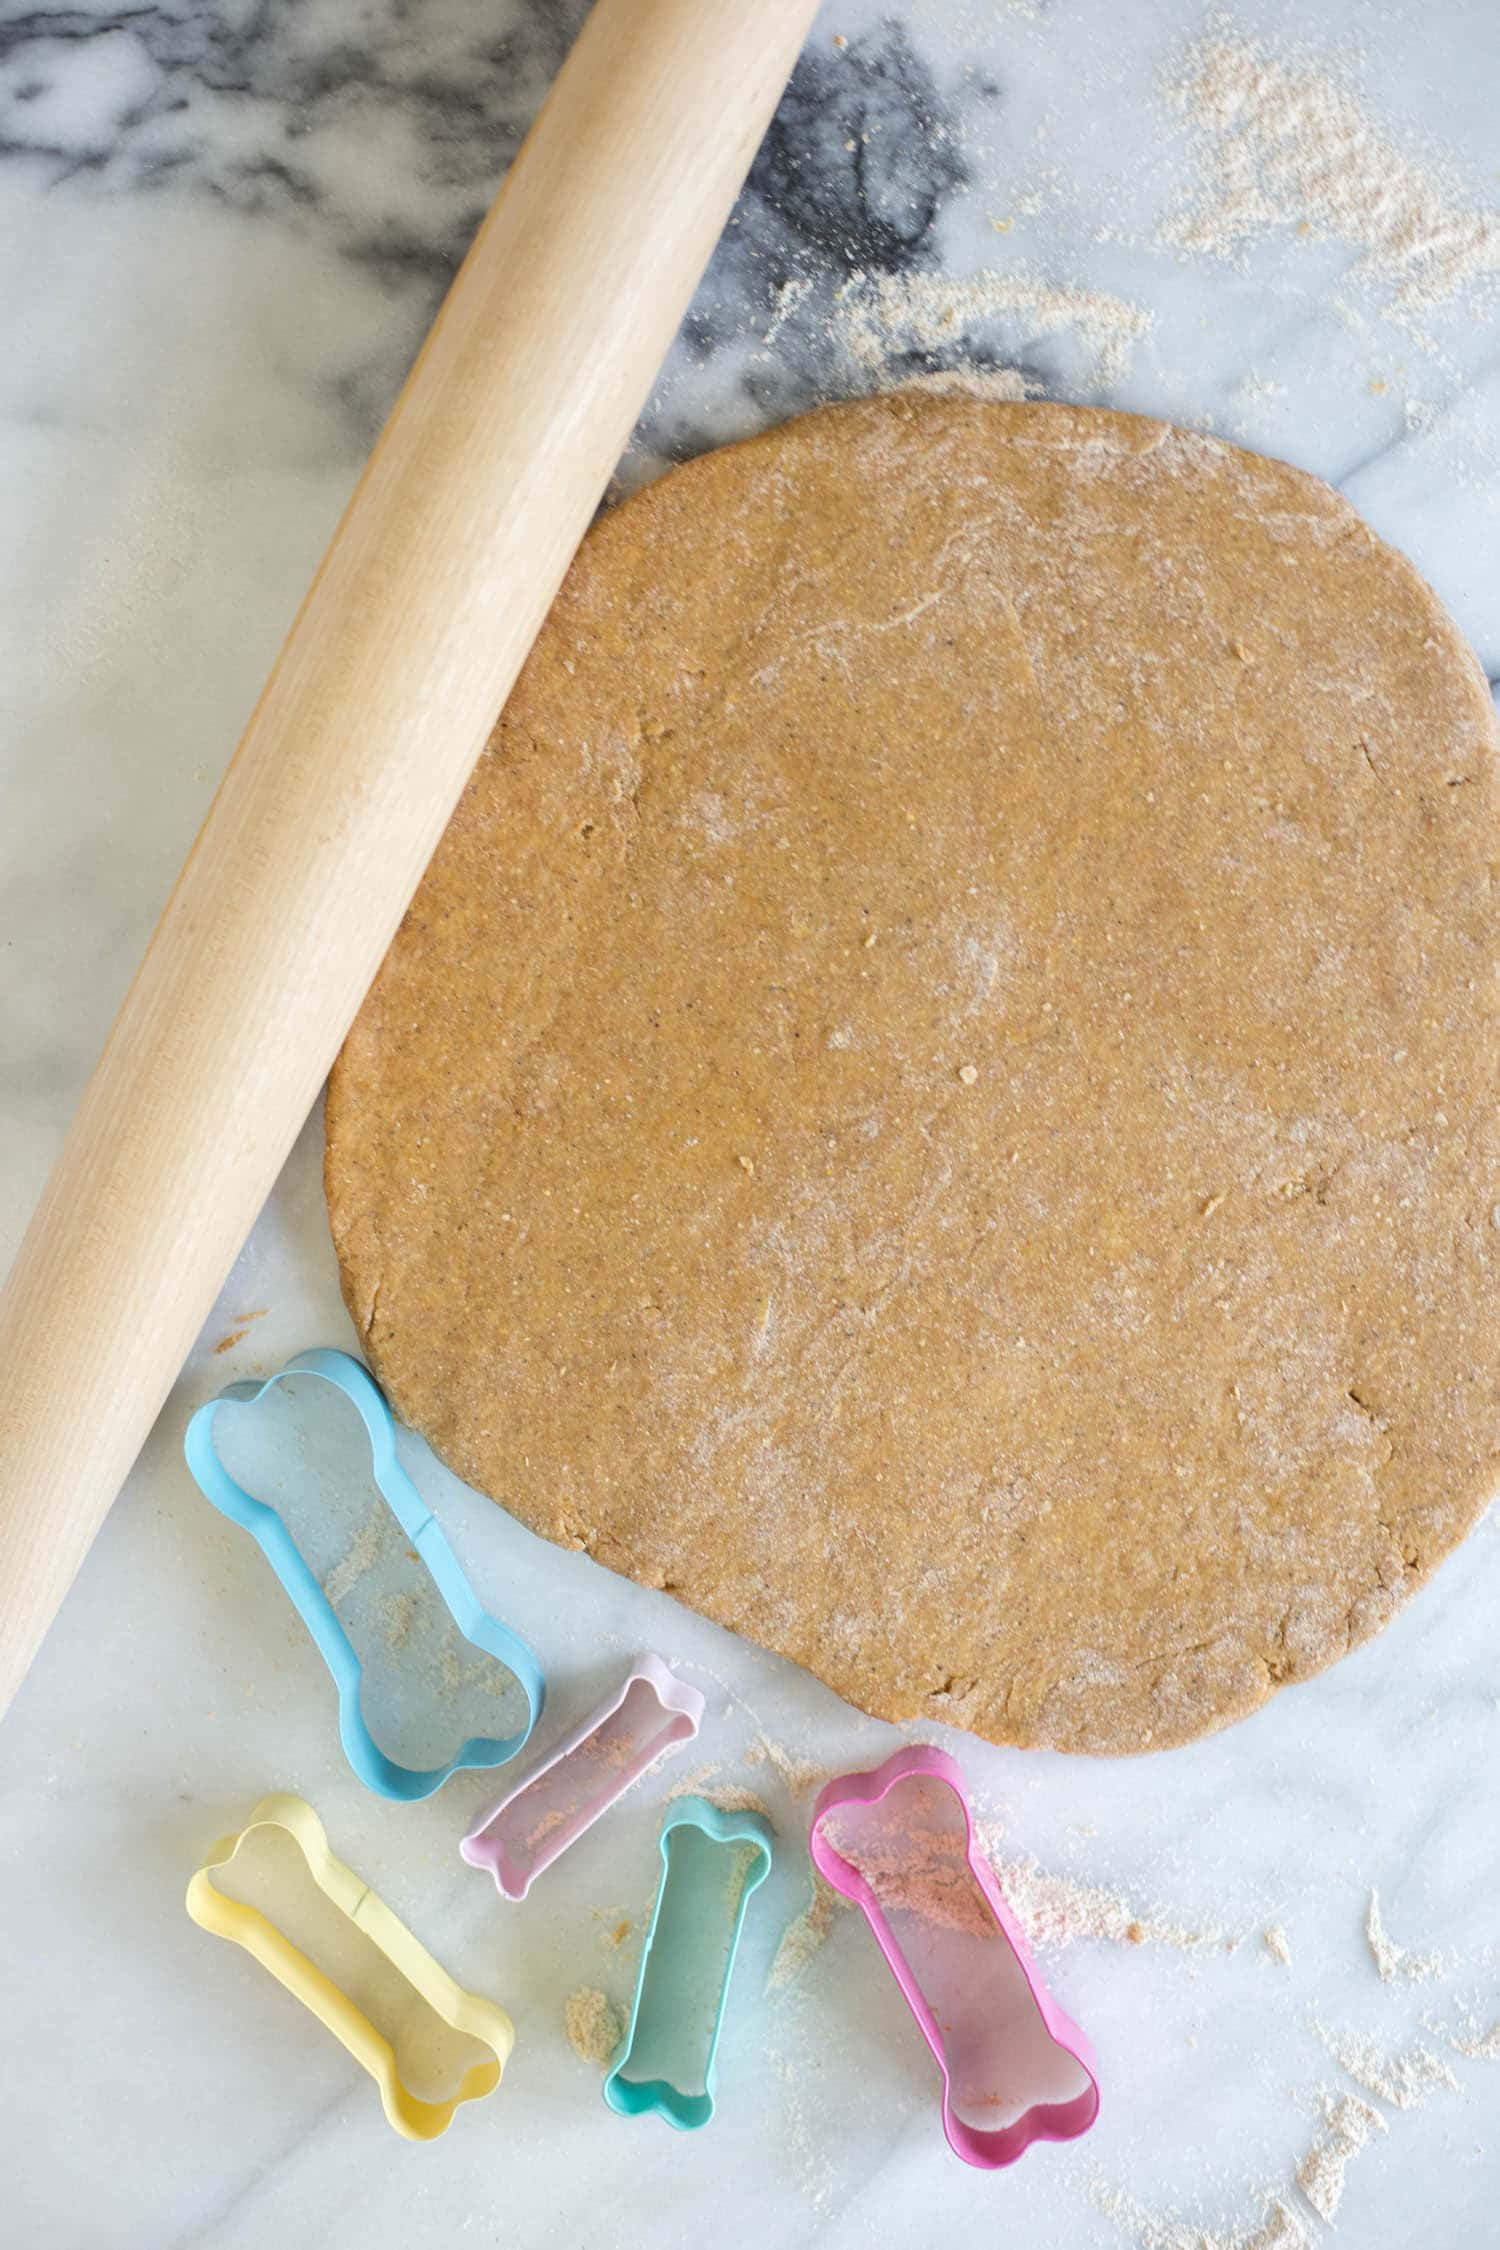 Dog biscuit dough rolled out on cutting board